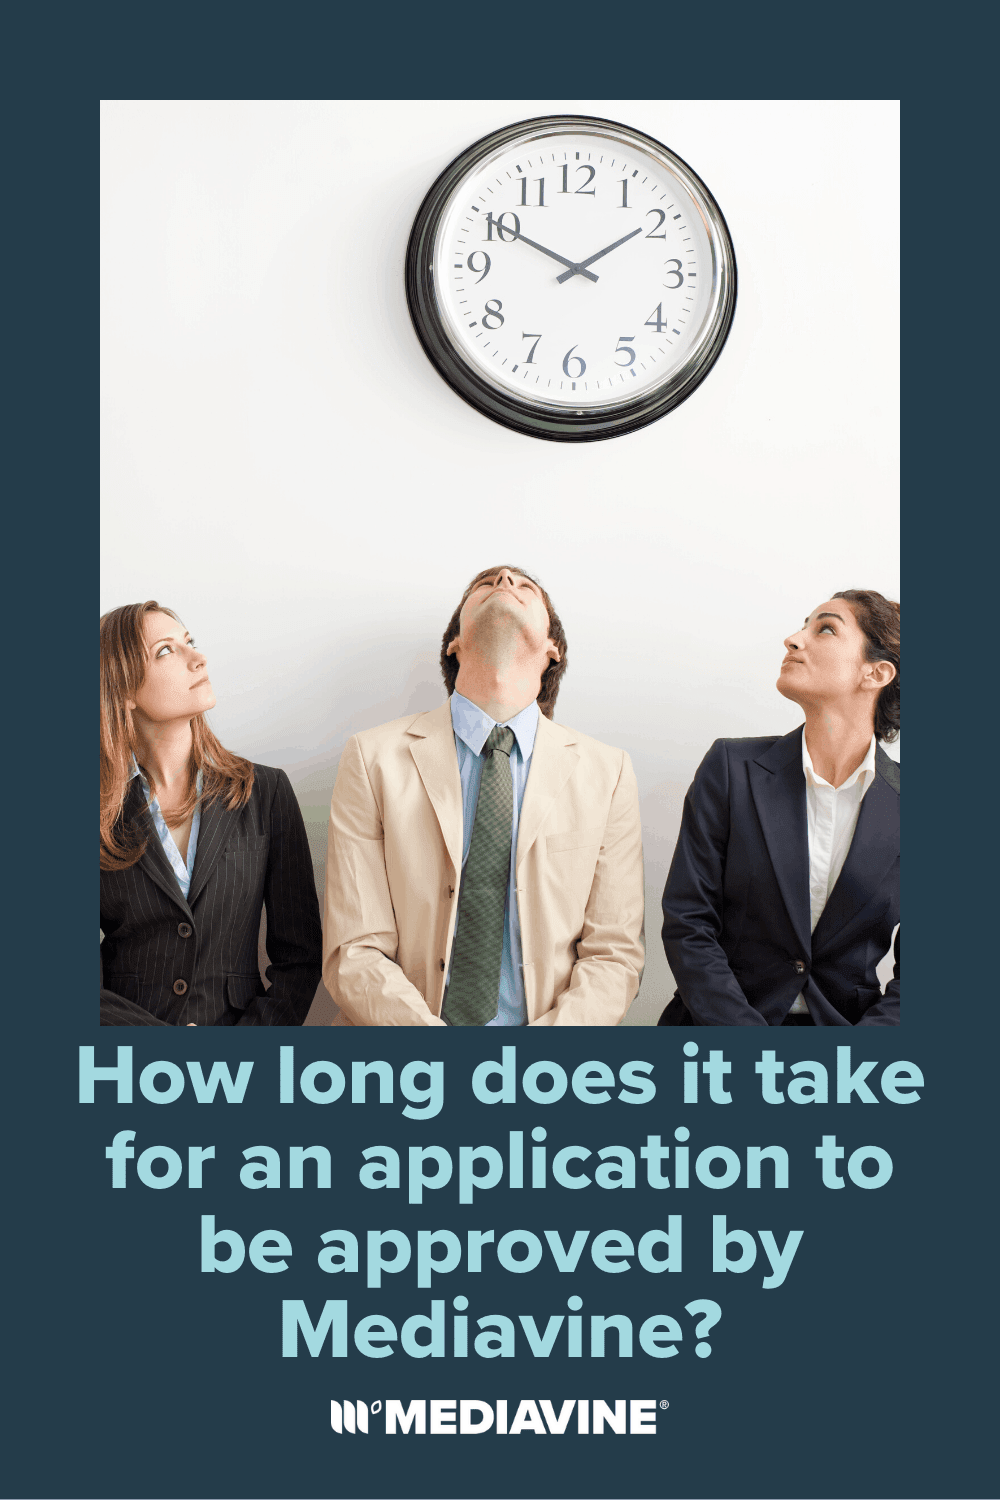 Mediavine Pinterest Image - How long does it take for an application to be approved by Mediavine?